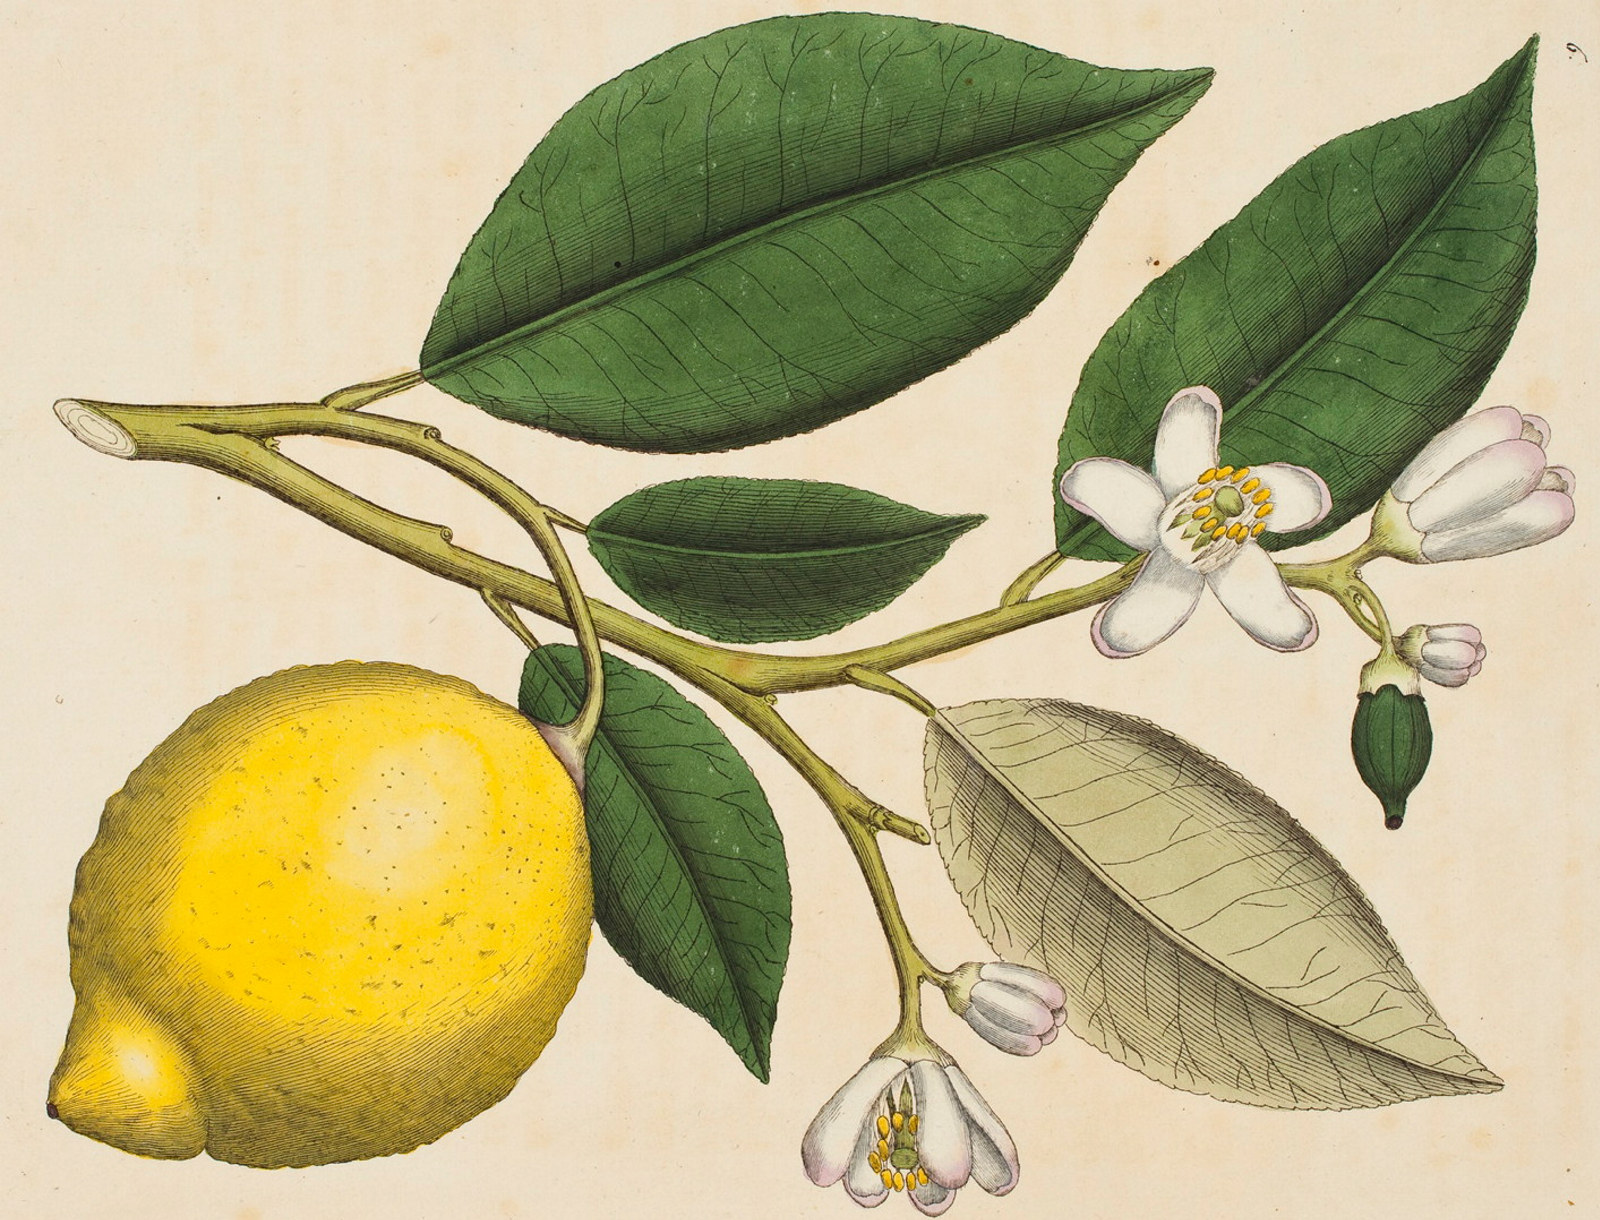 Hand-coloured image of branch of tree with leaves, lemon and flowers.